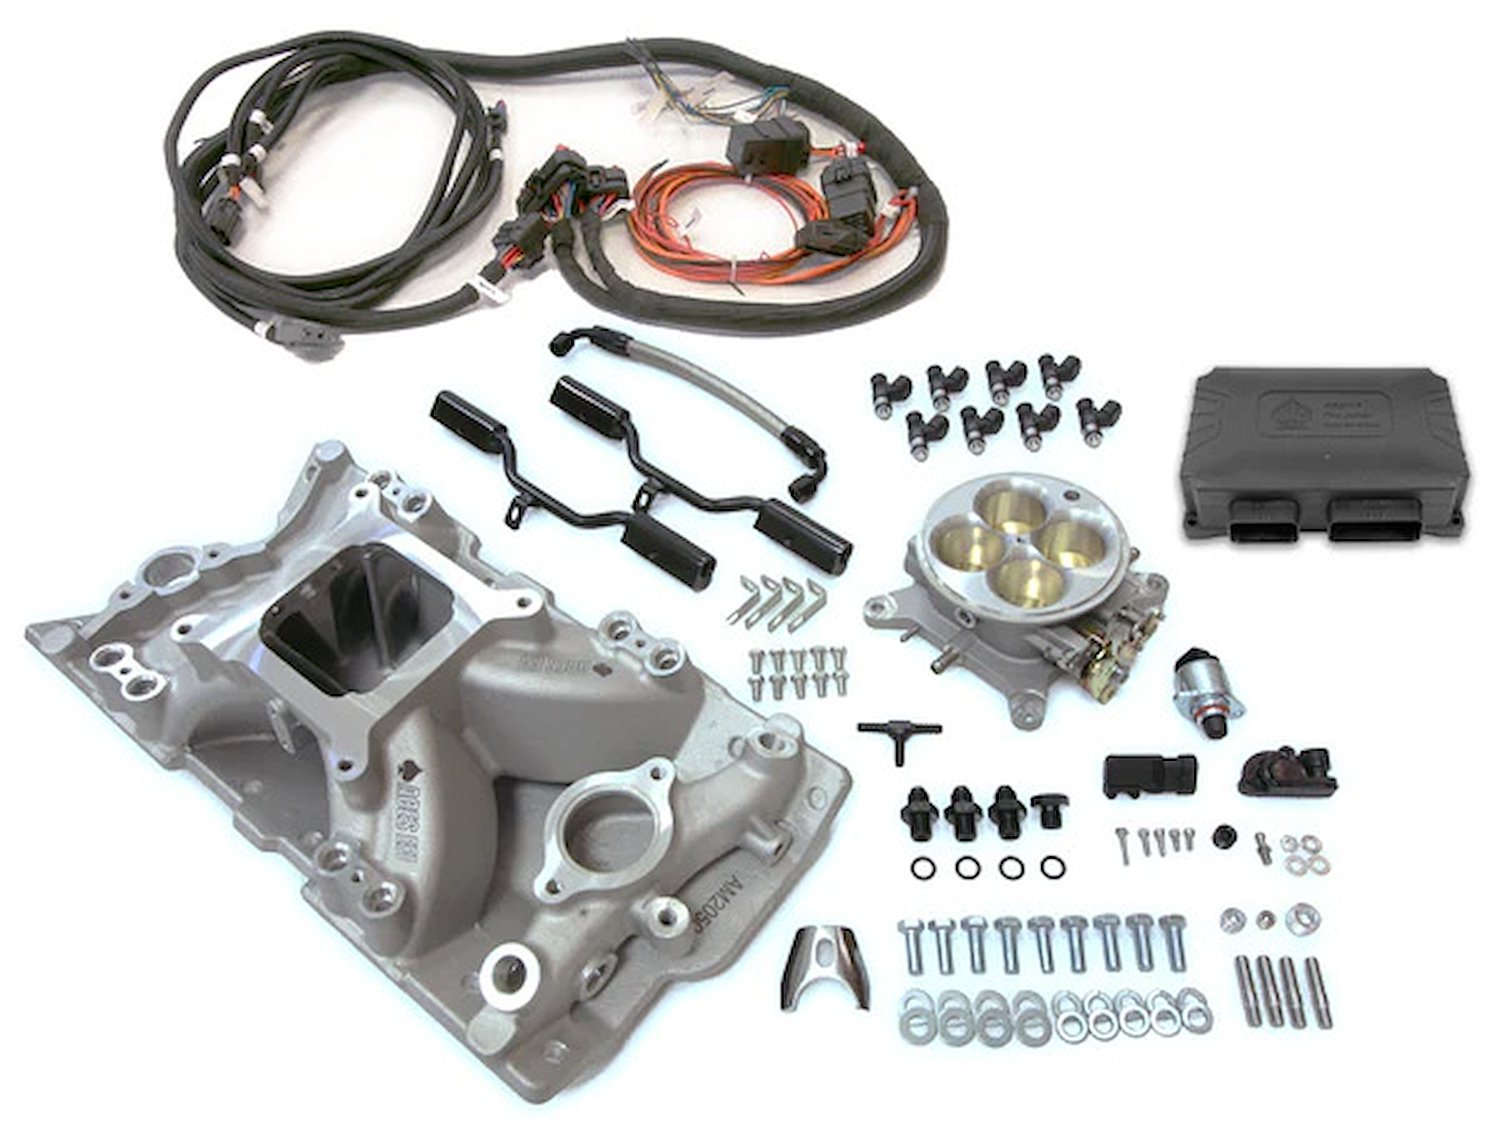 AS2015P-SBF-S2080 The Joker EFI Standalone Management System, Small Block Ford, with Silver AM2080 Intake Manifold